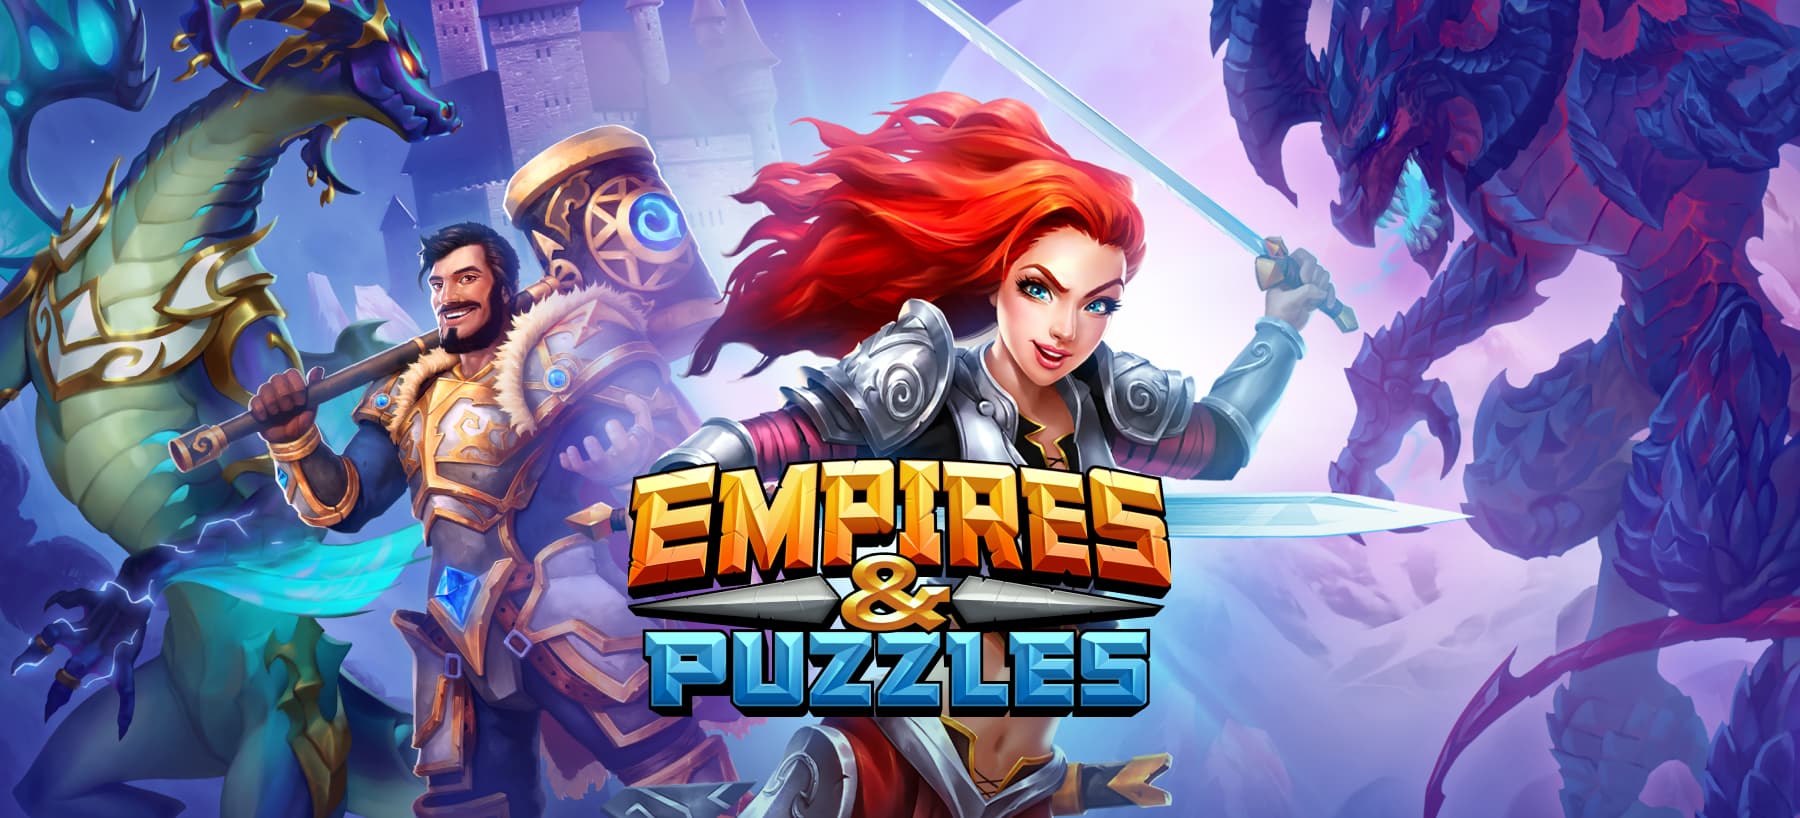 Empires and puzzles milena